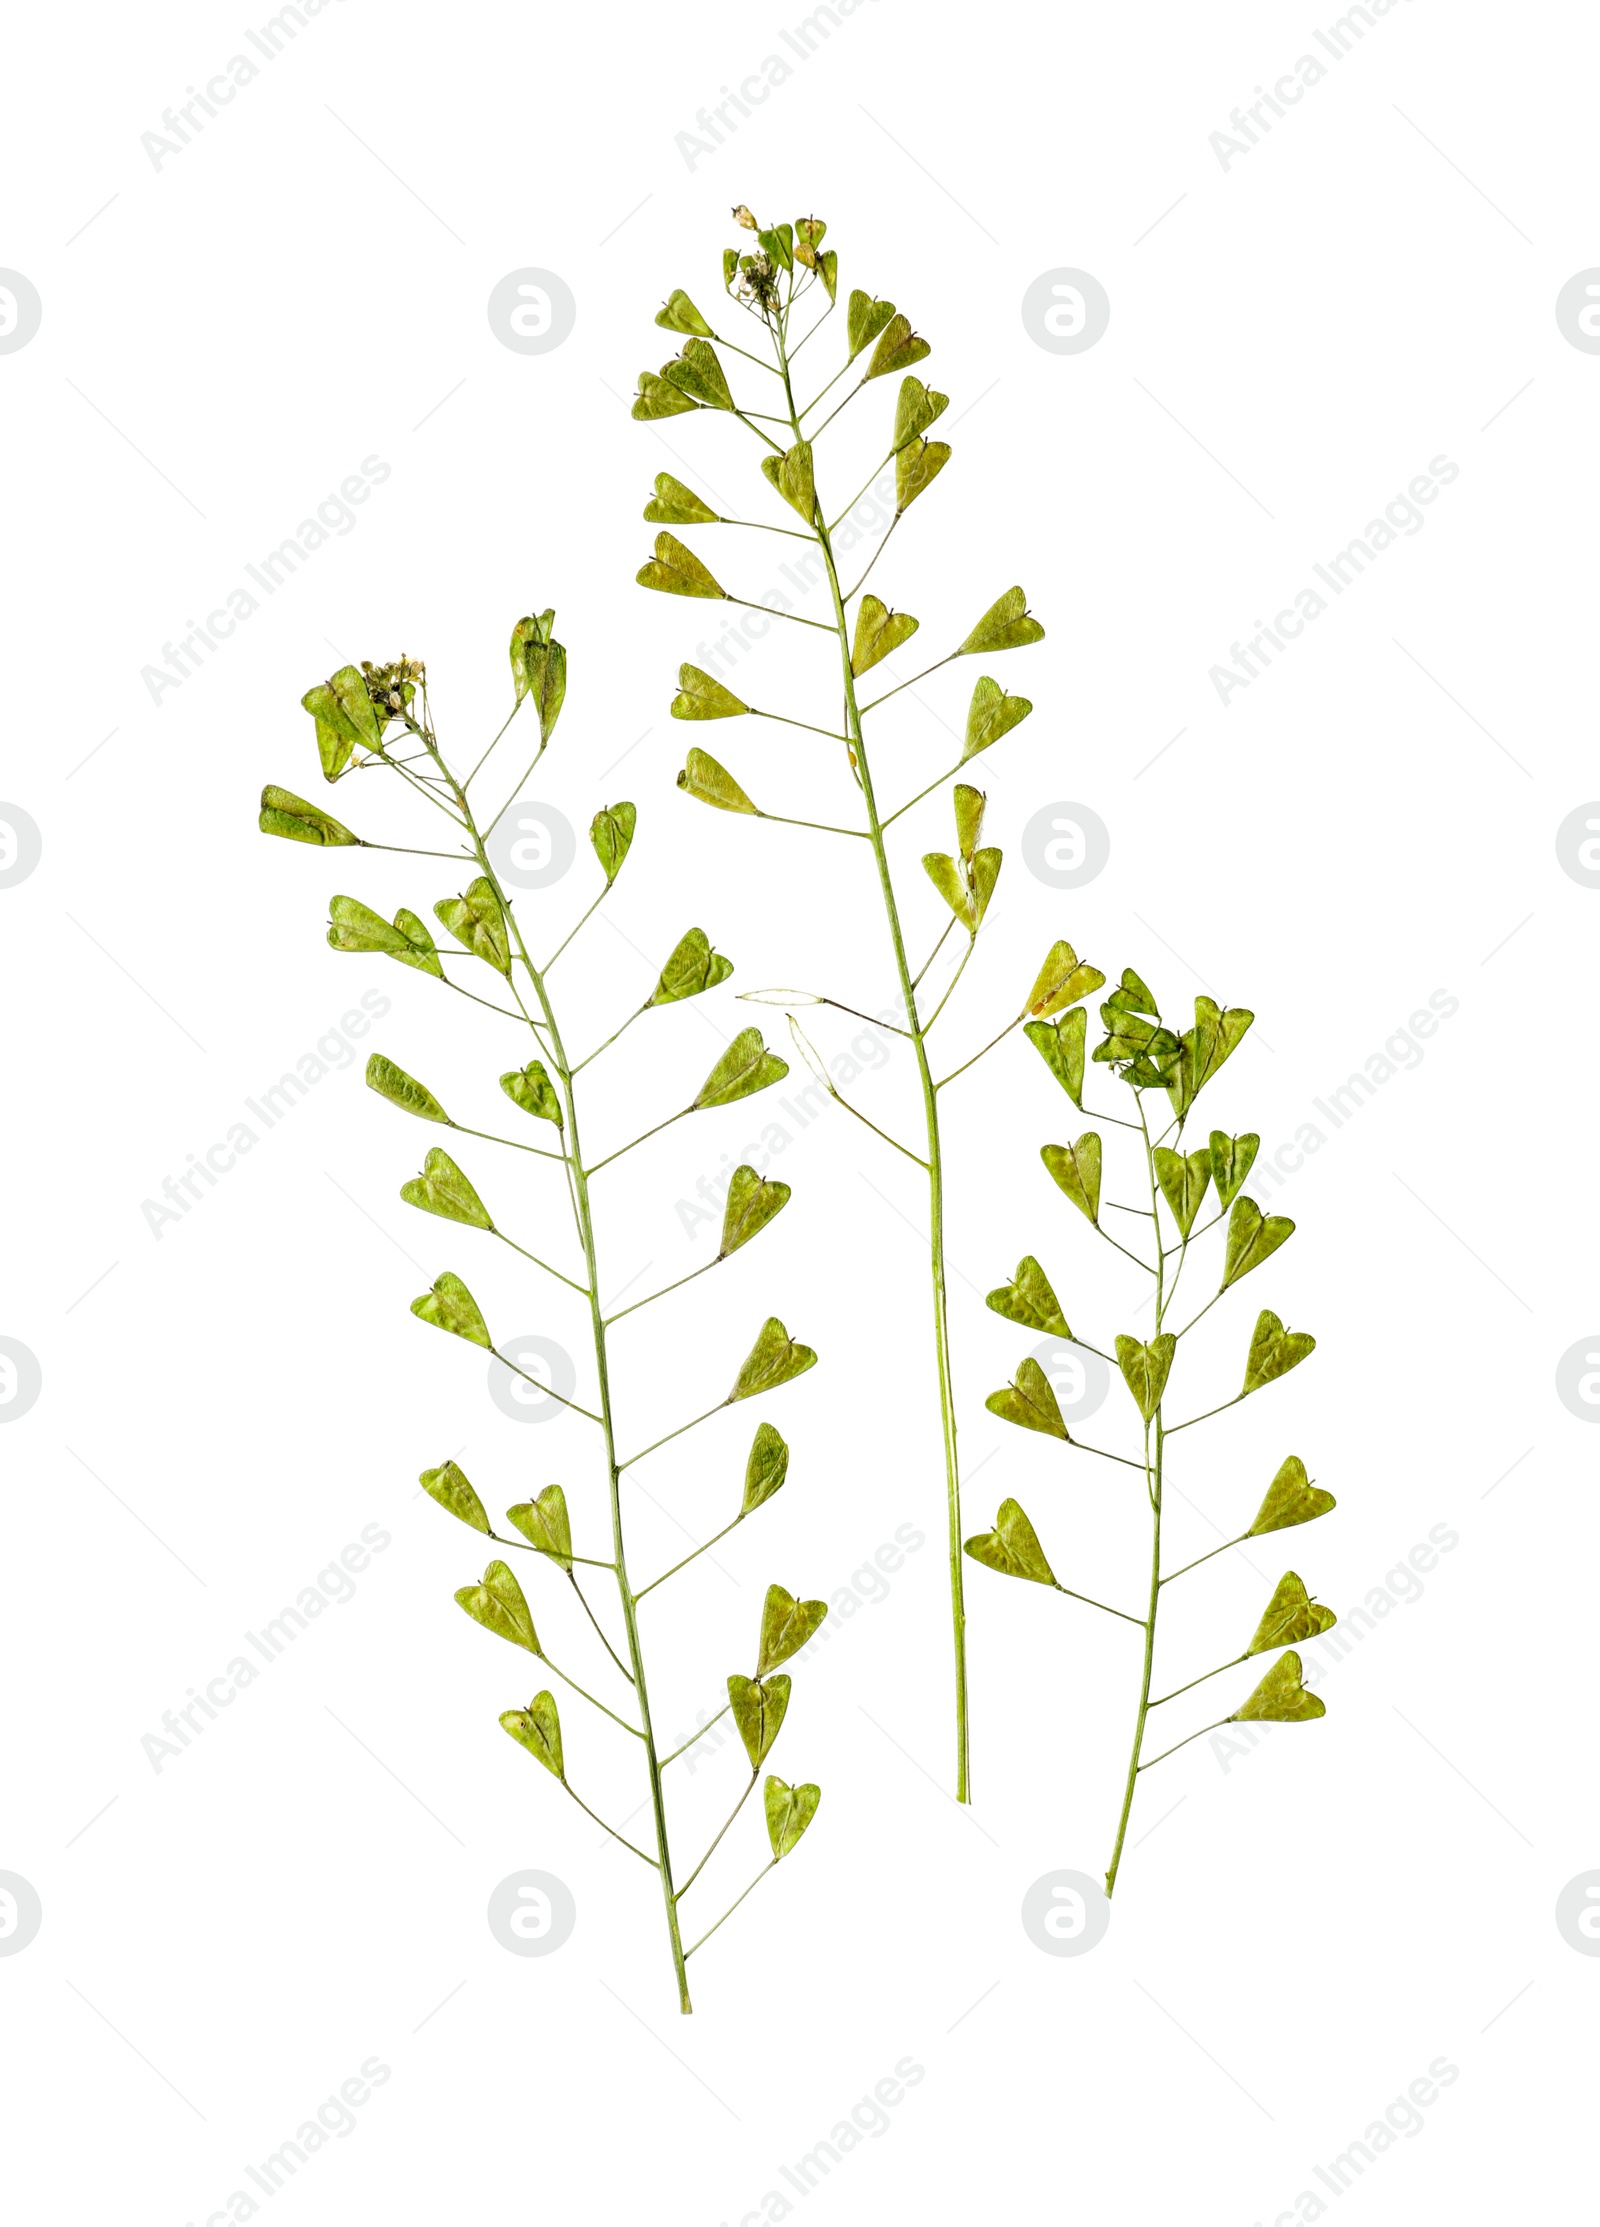 Photo of Dried shepherd's purse flowers on white background